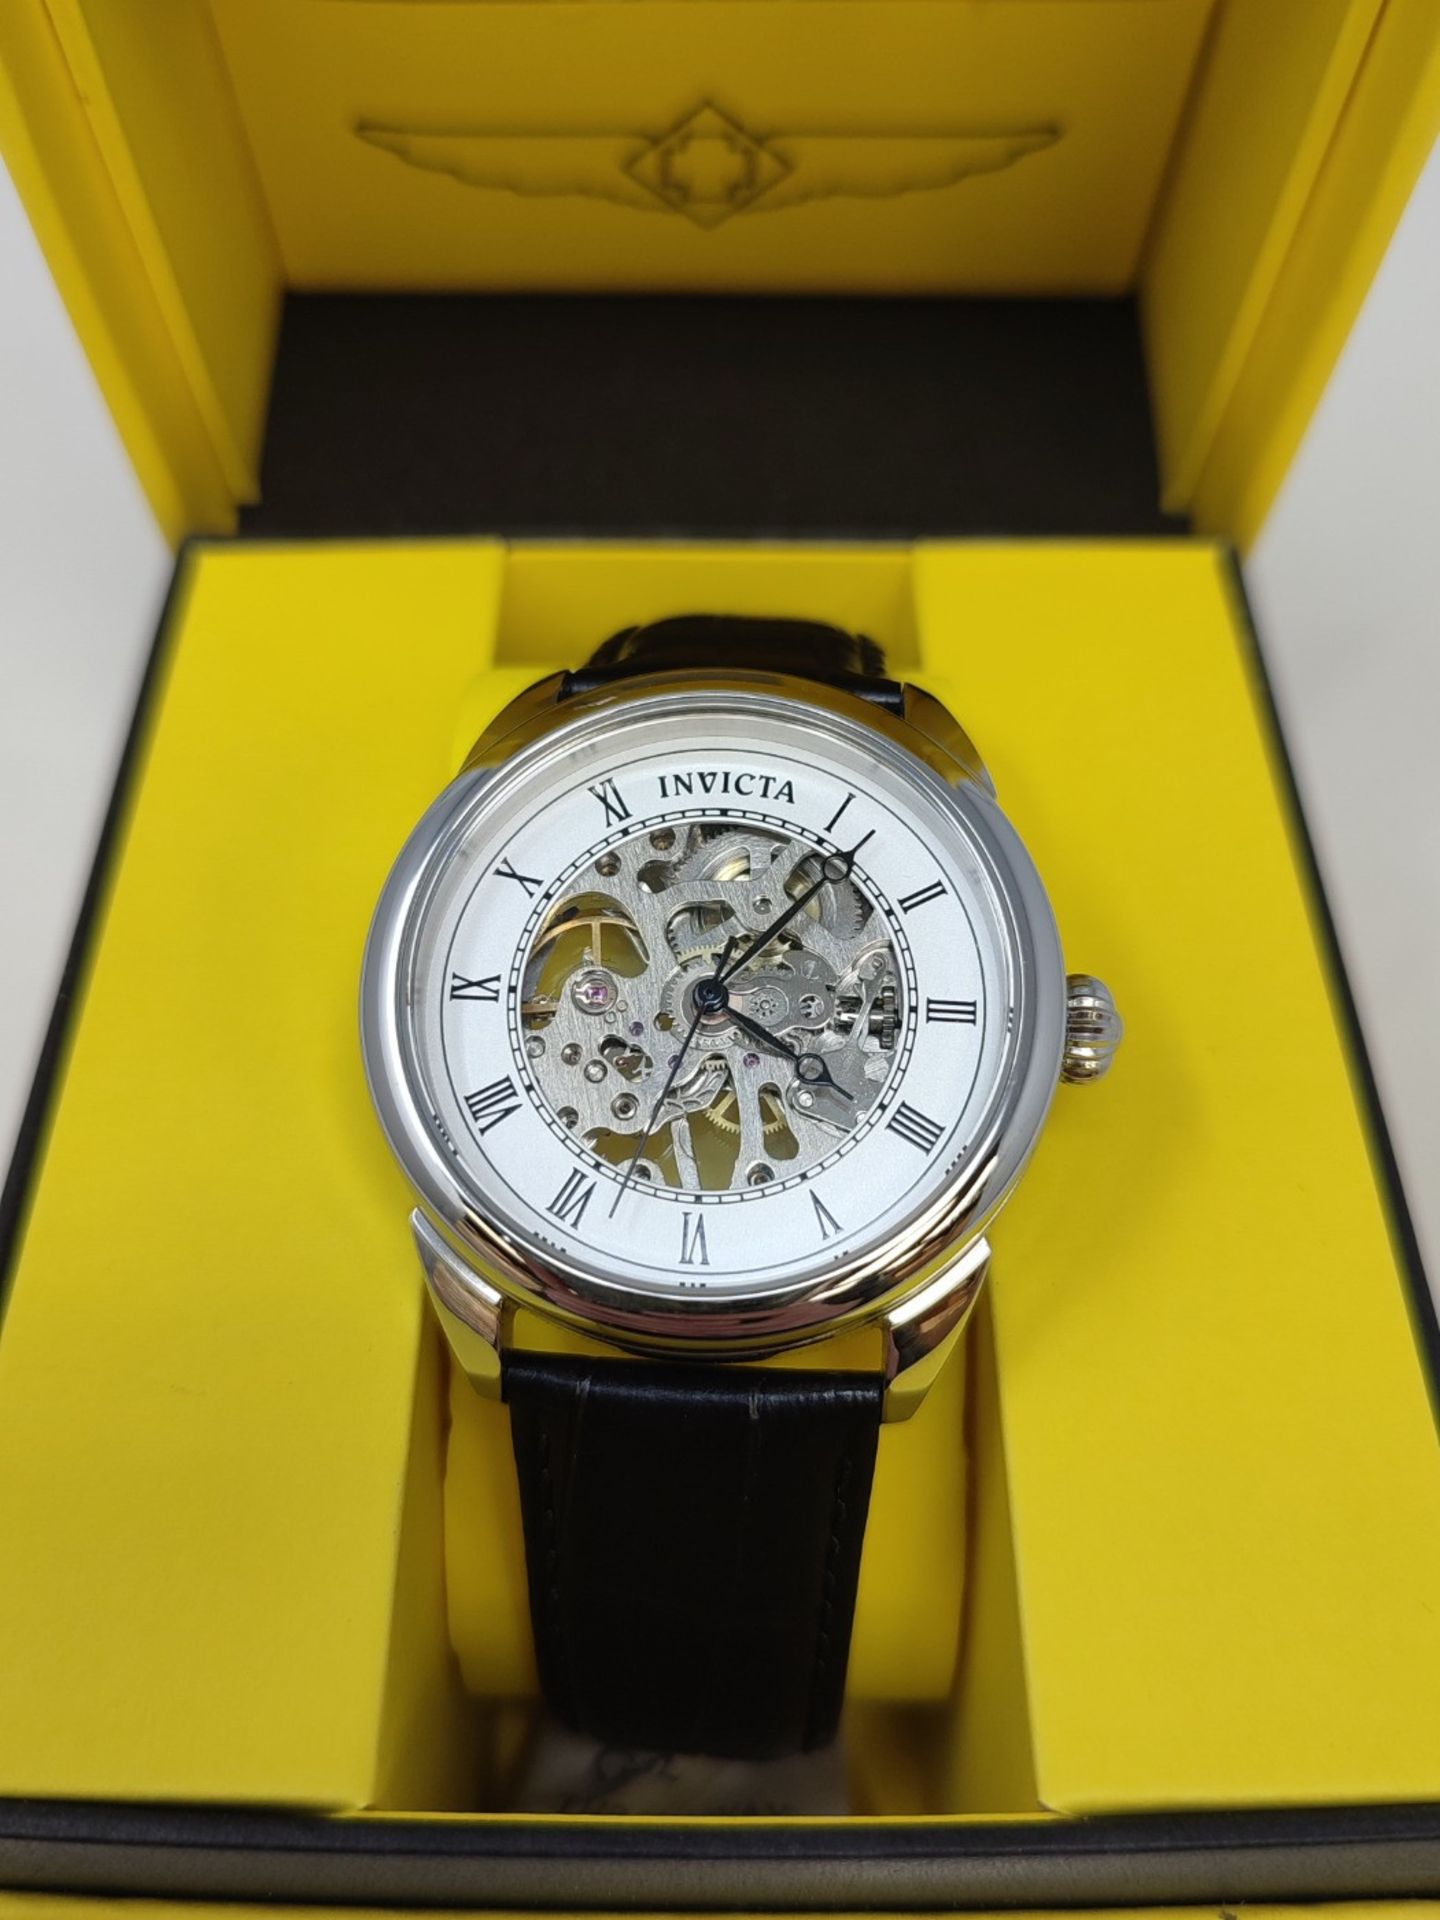 RRP £69.00 Invicta Specialty - Men's stainless steel watch with mechanical movement - 42 mm - Image 2 of 3